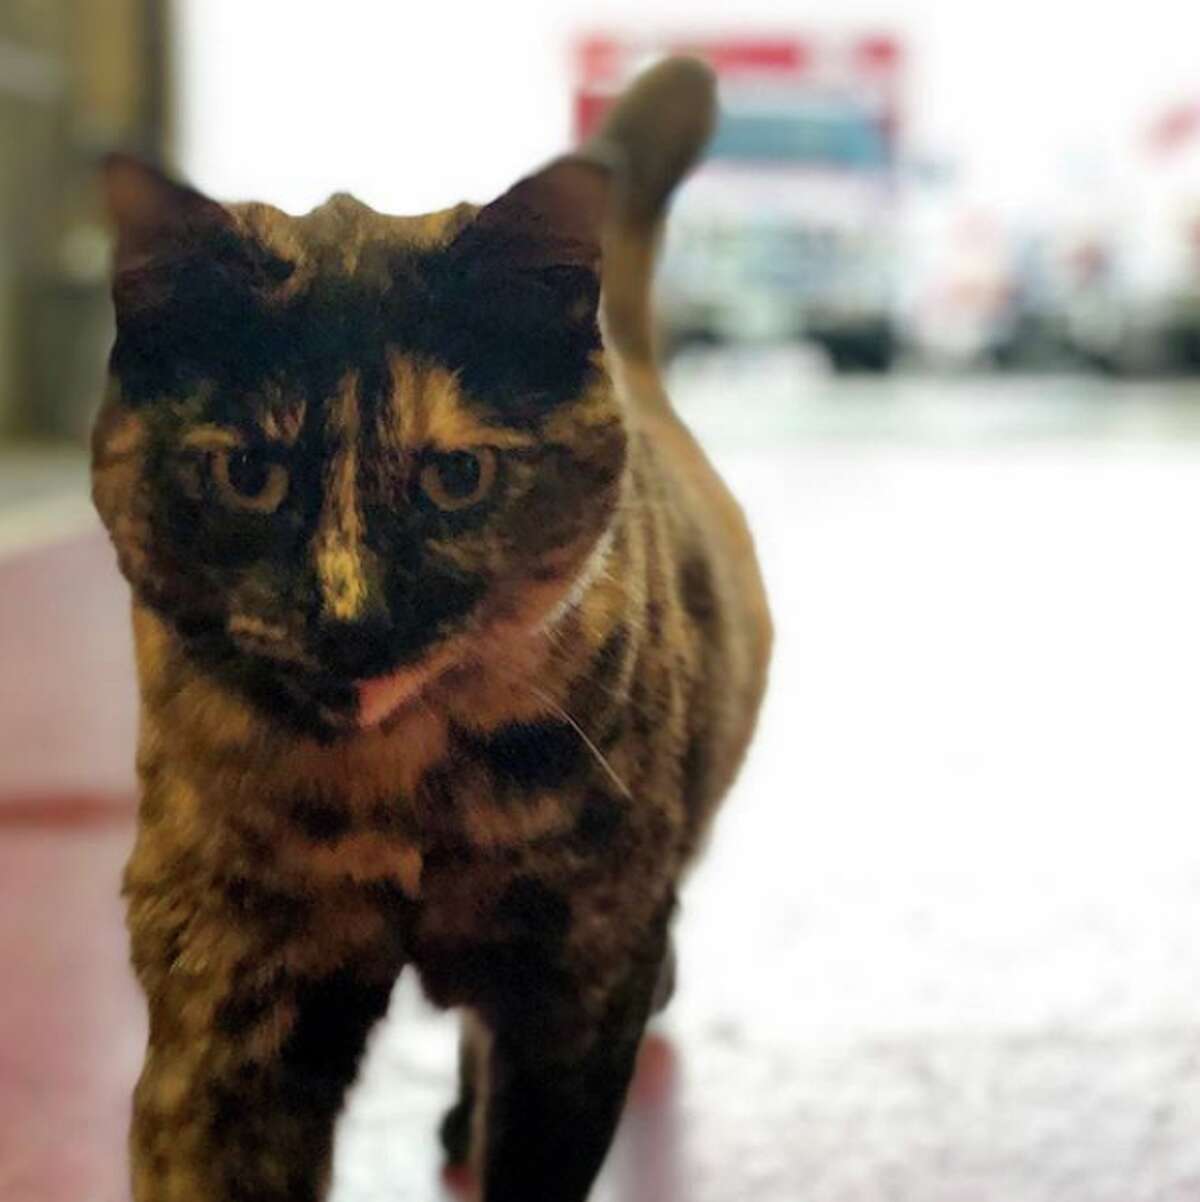 The employees at San Francisco Fire Department Station 49 say they are being asked to get rid of their cat, Edna, after an anonymous complaint was made. Those at Station 49 argue that the cat is a stress reliever, and have launched a social media campaign dubbed #ednastays in hopes that Edna will be allowed at the station.